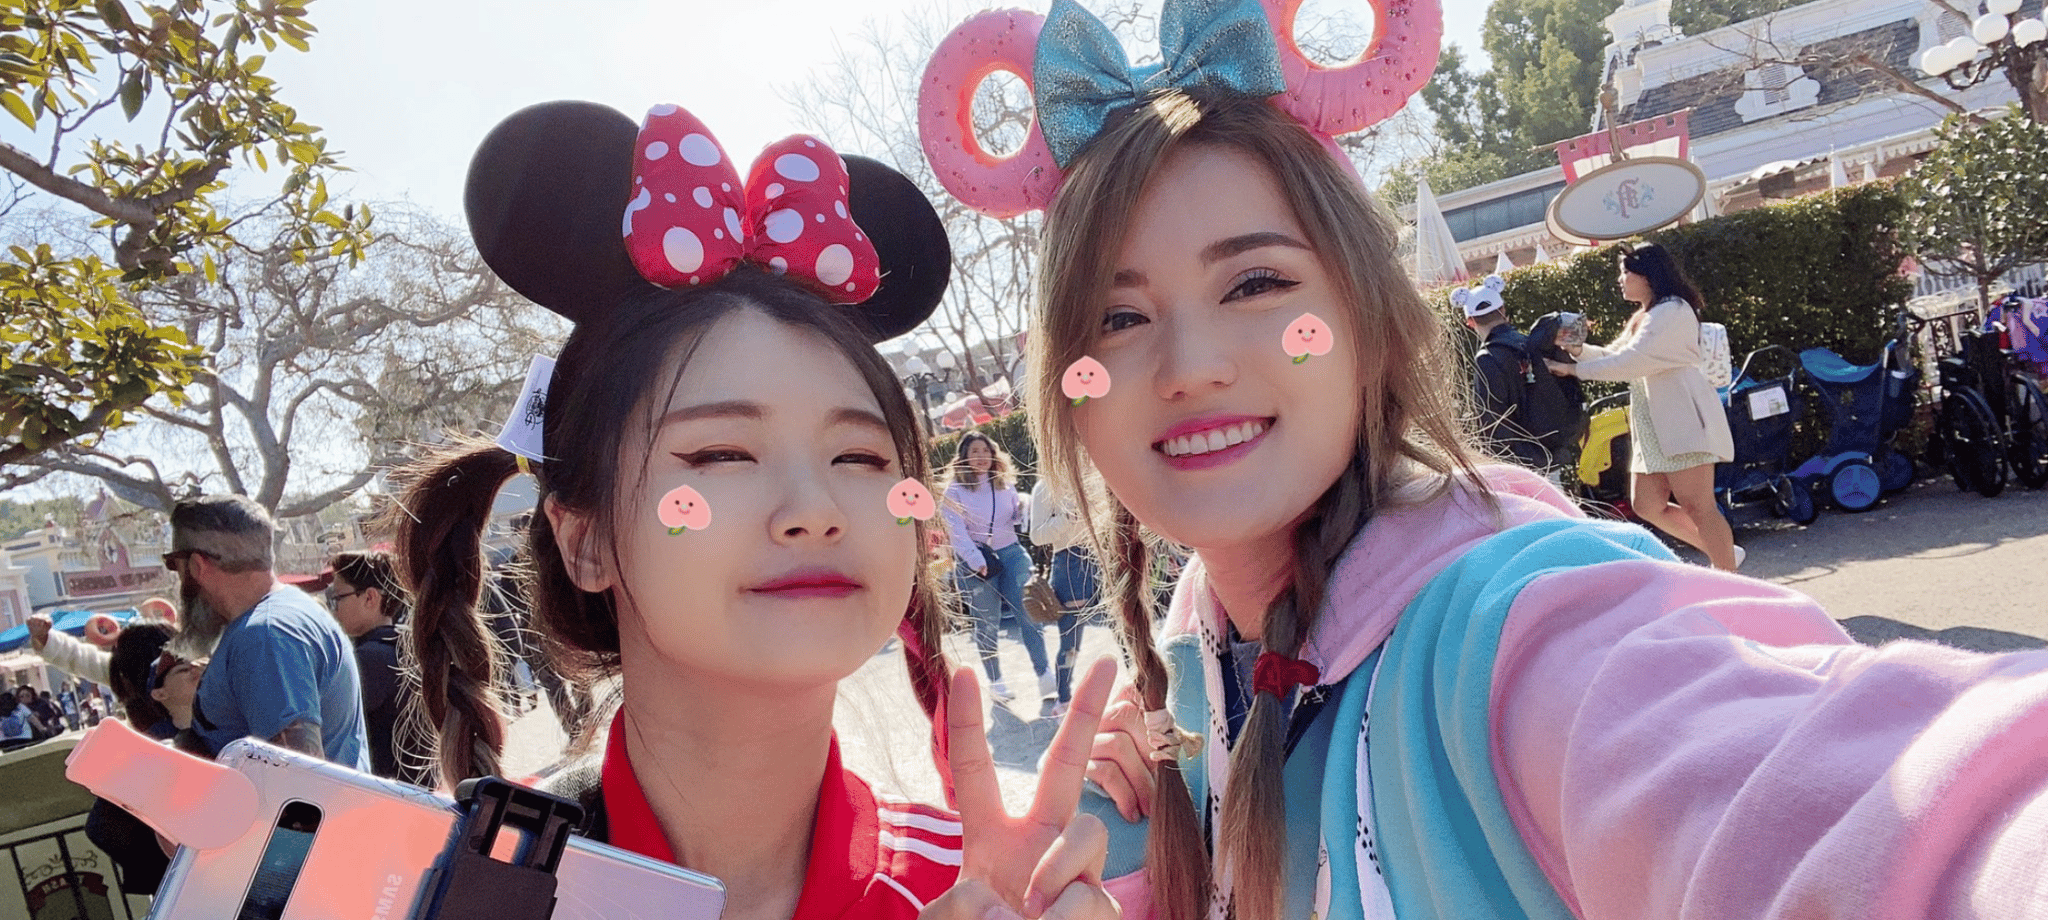 HAchubby visited Disneyland with Angelskimi.